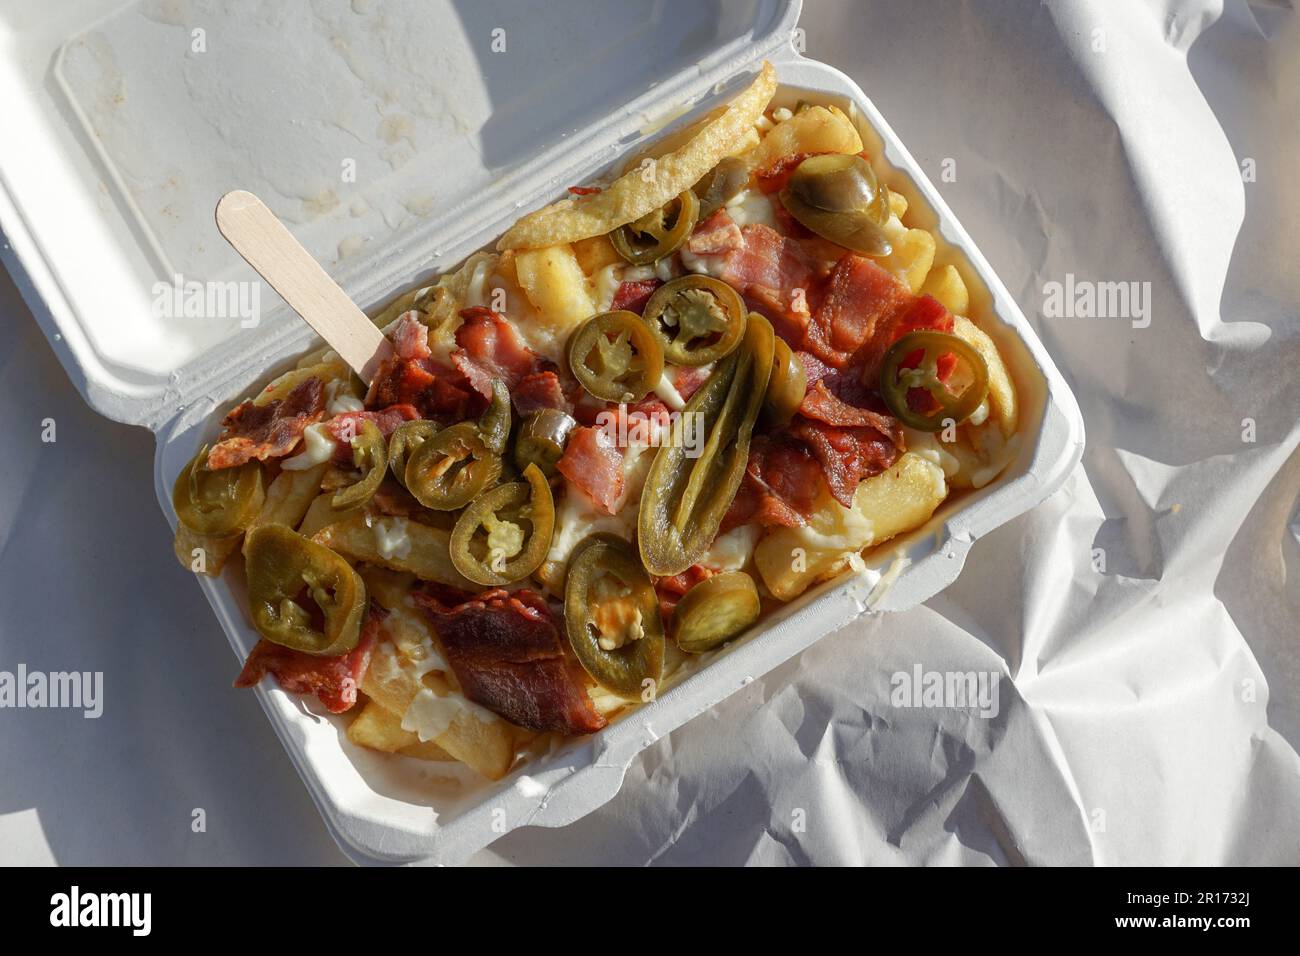 a tray of dirty fries. takeaway portion of chips with jalapenos, bacon and cheese Stock Photo